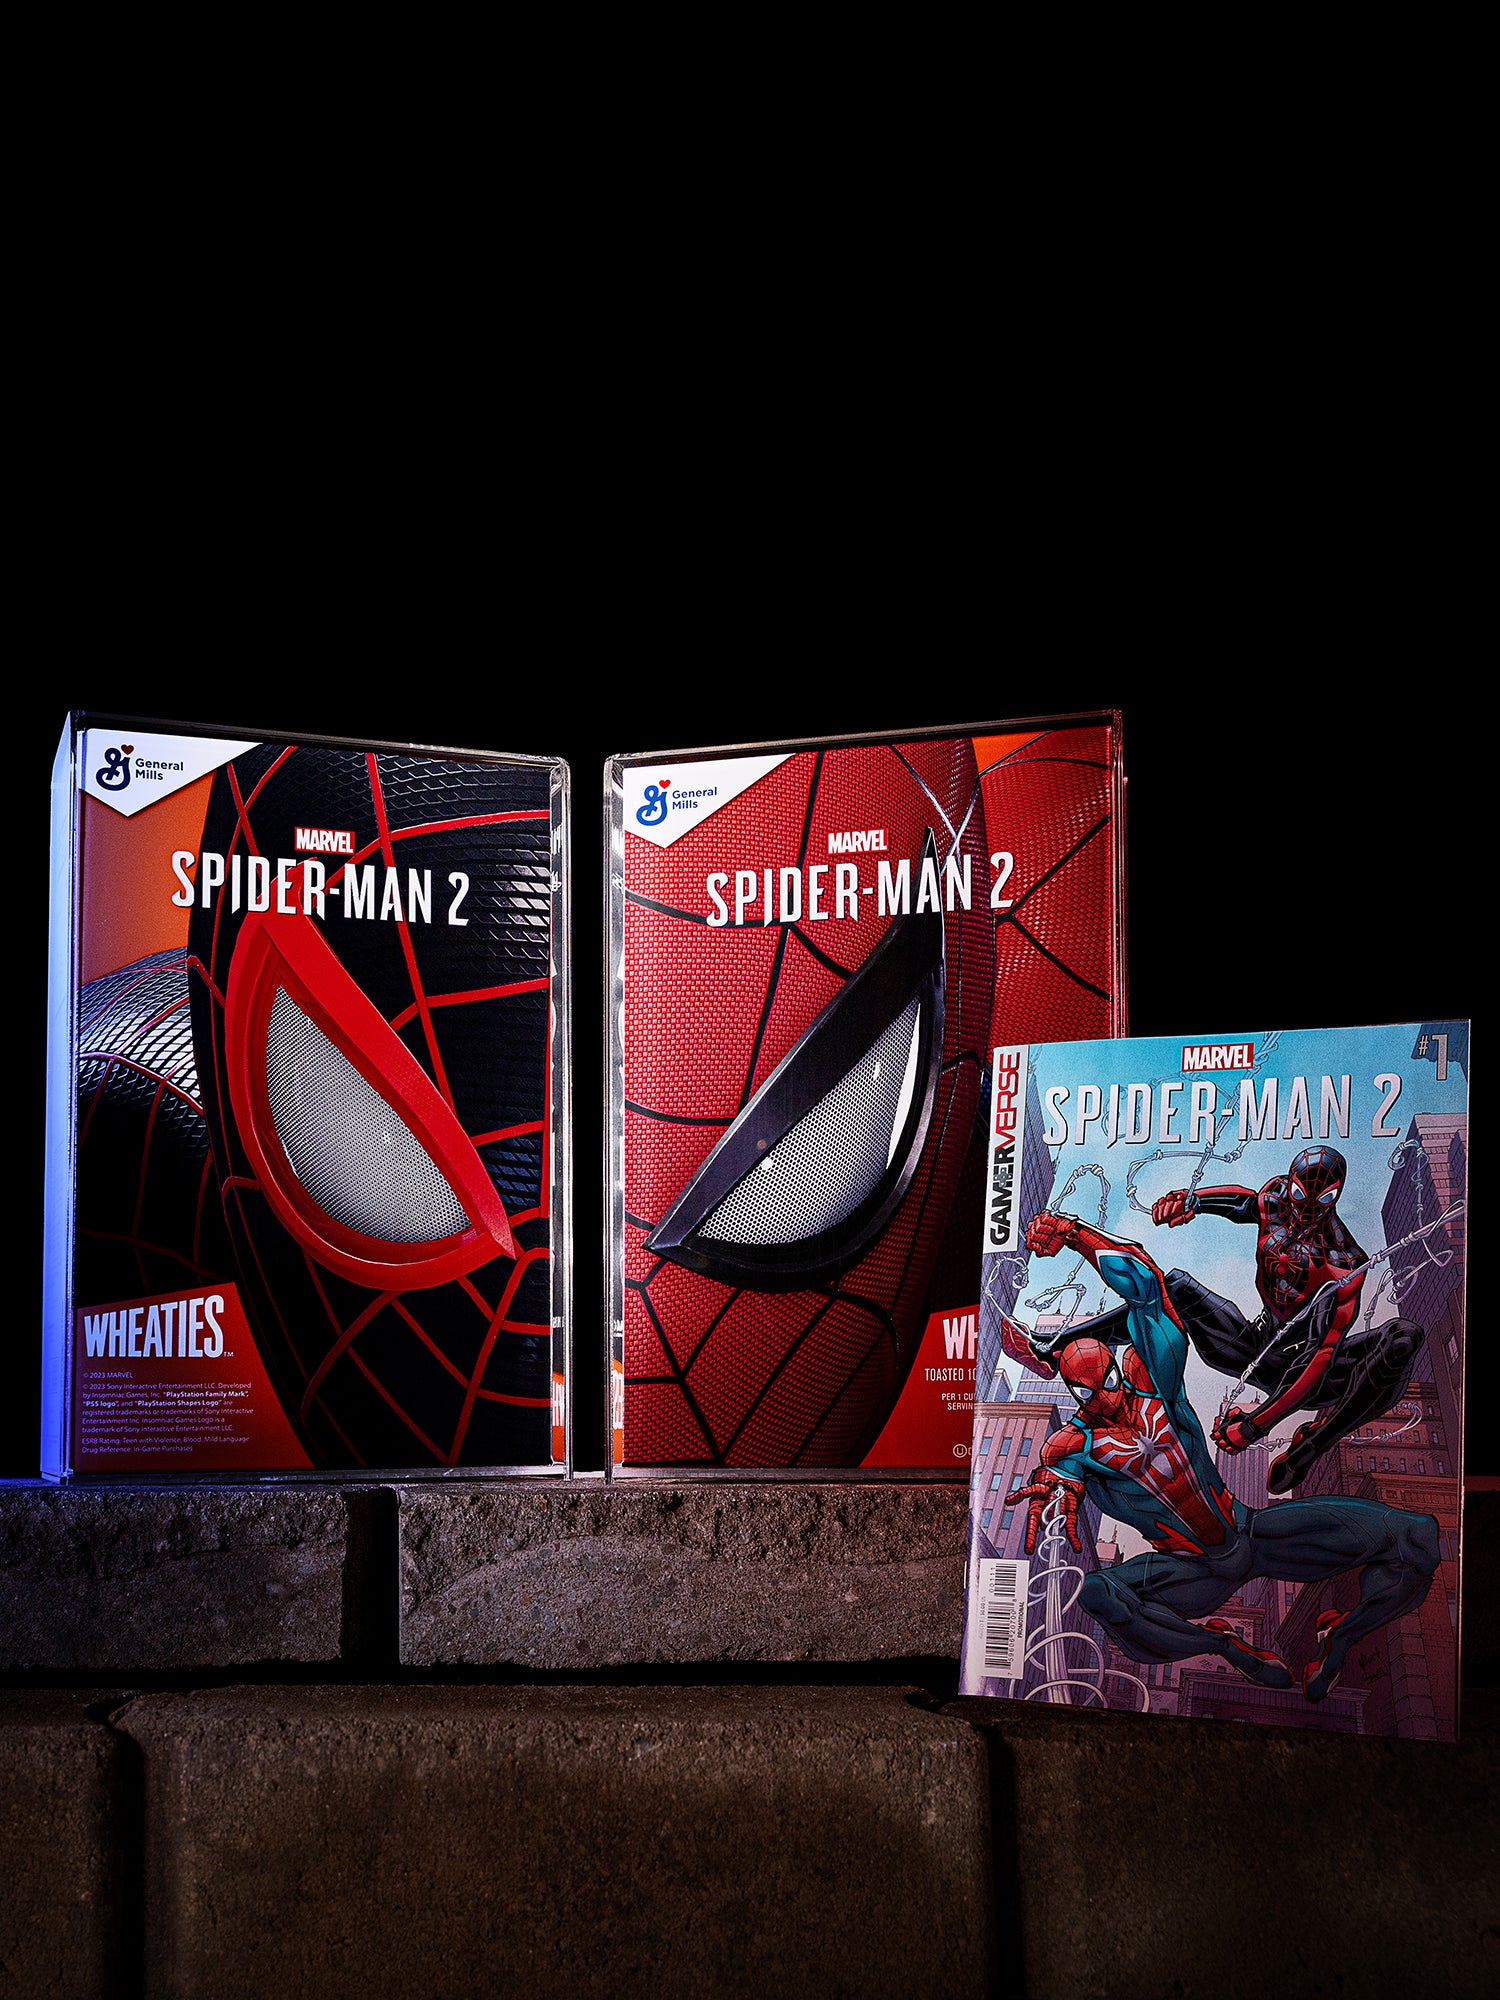 Marvel's Spider-Man 2 Will Feature a Brand New Activities System